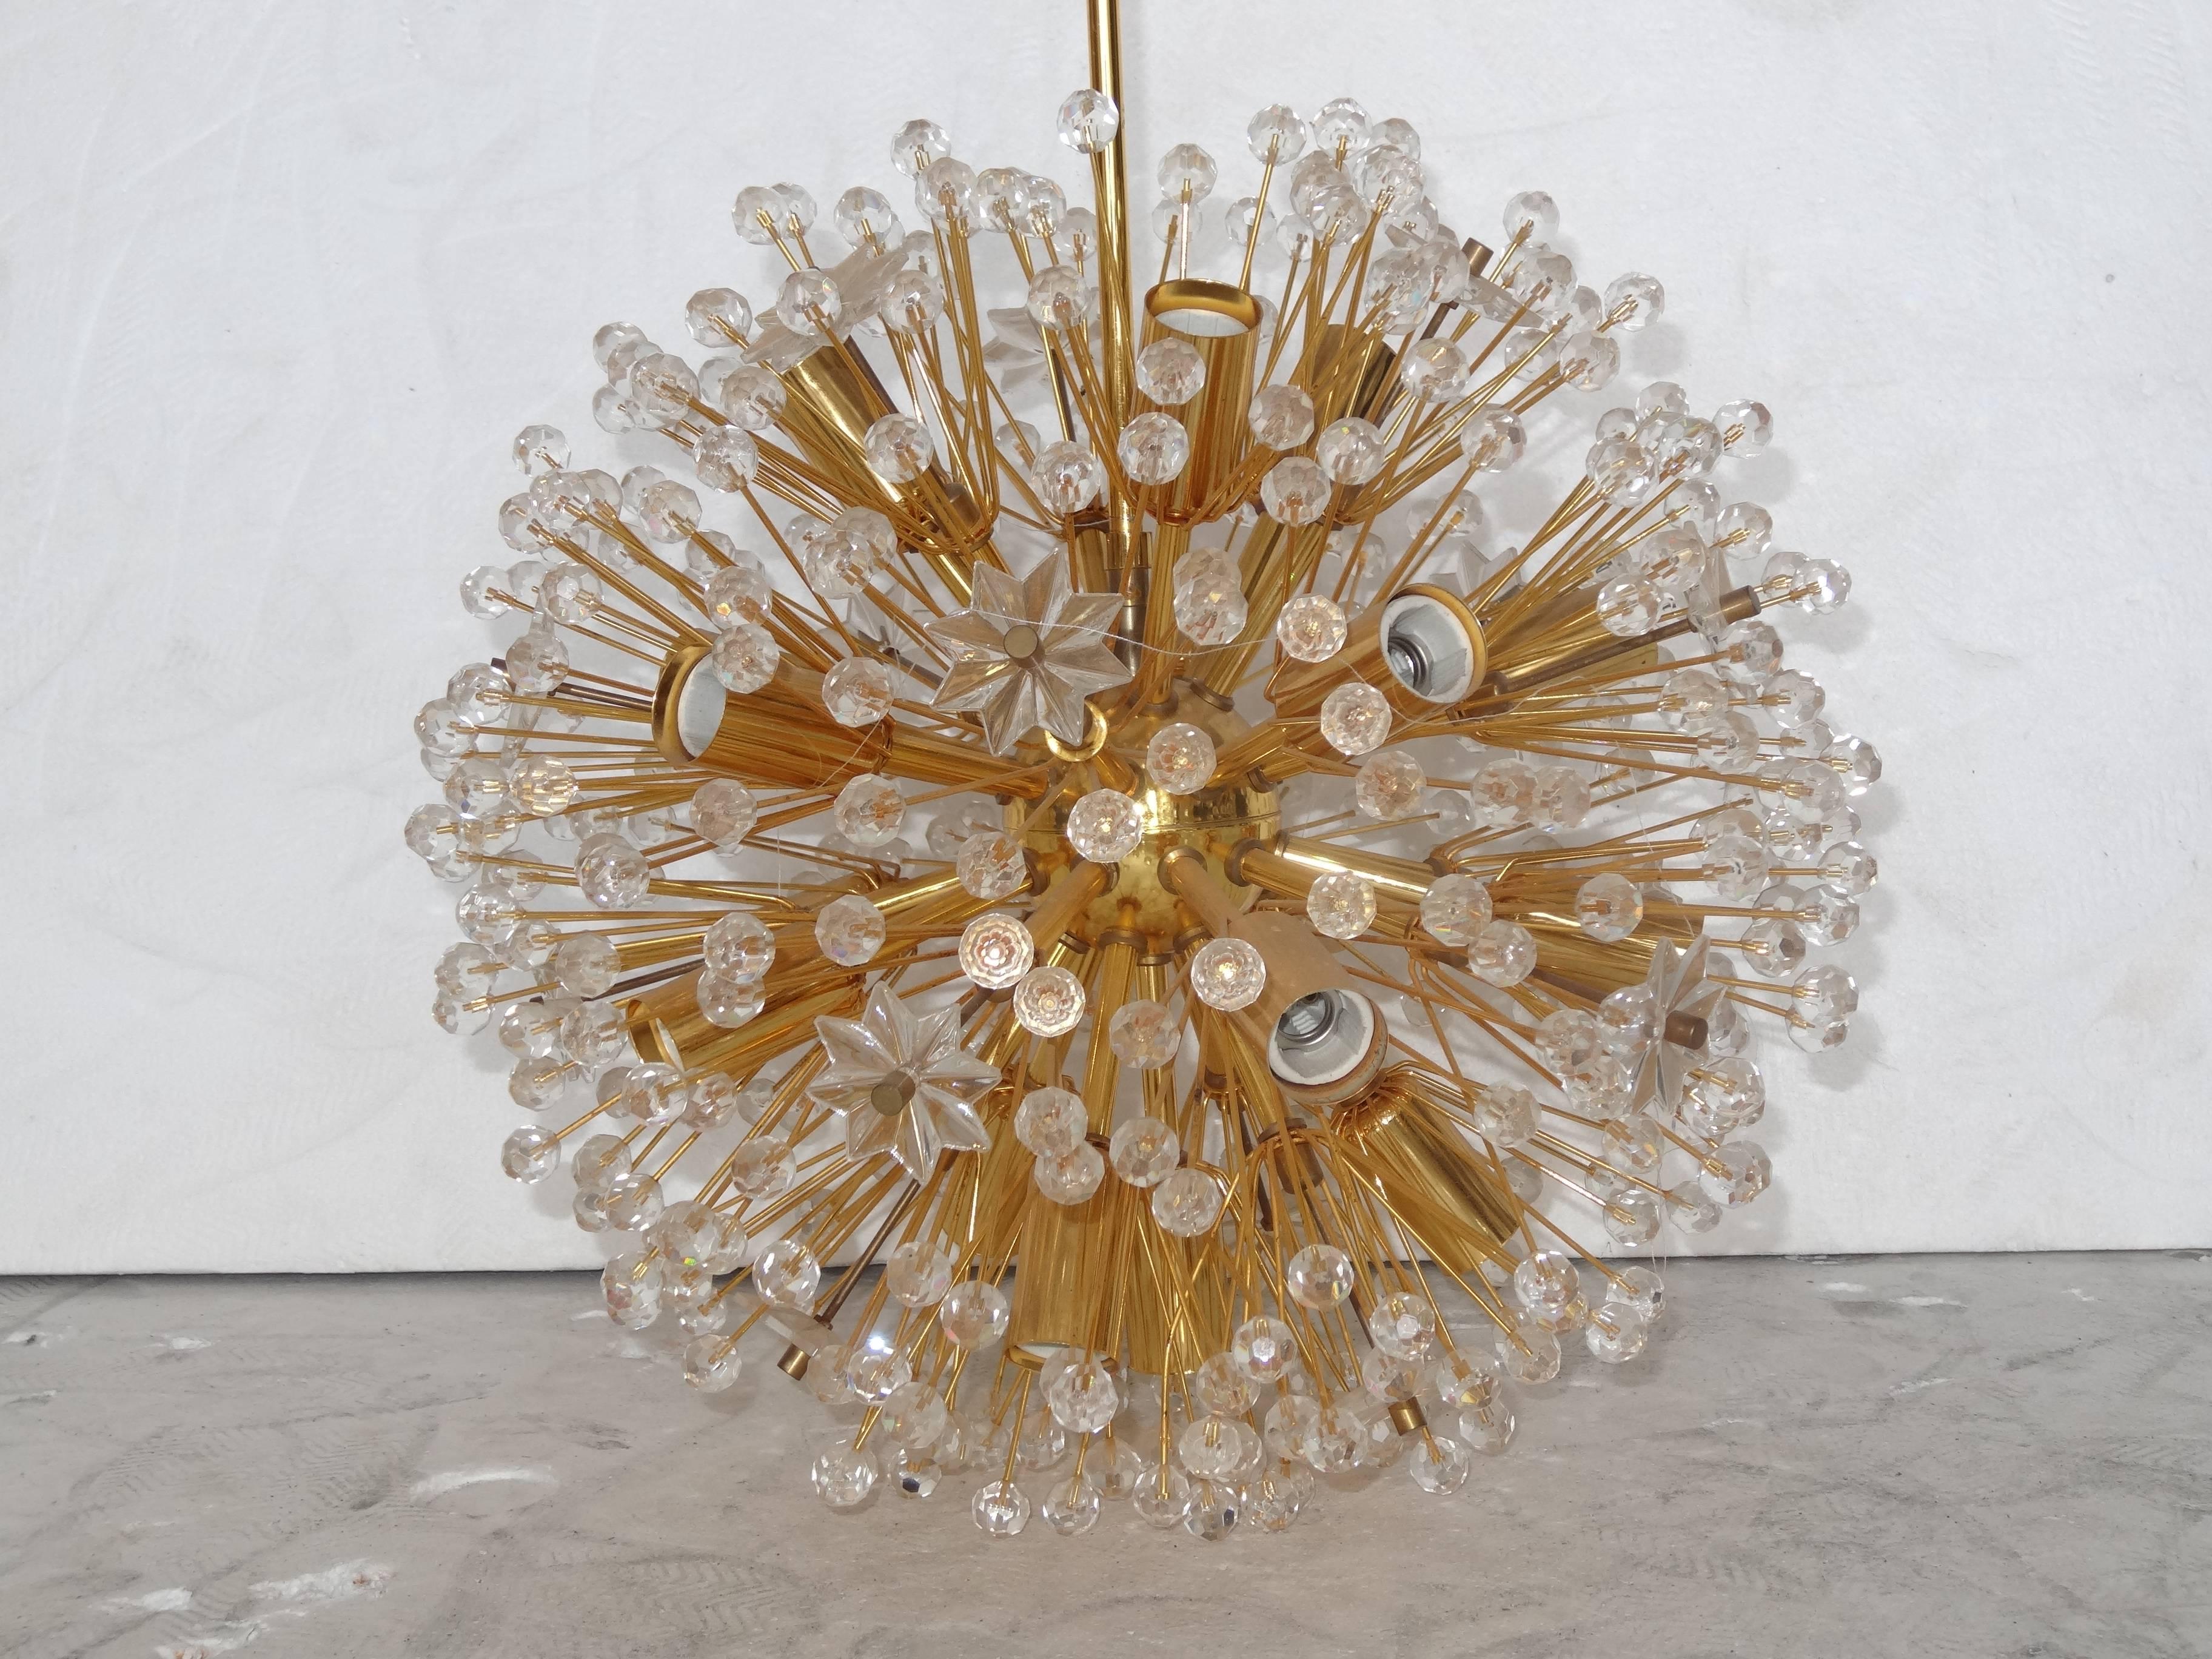 A beautiful gold-plated and Lucite starburst chandelier.
The chandelier is inspired by the Austrian maker Lobmeyr.
Chandelier construction is first quality.
Wiring has not been converted. If interested in wiring I can provide a quote from my